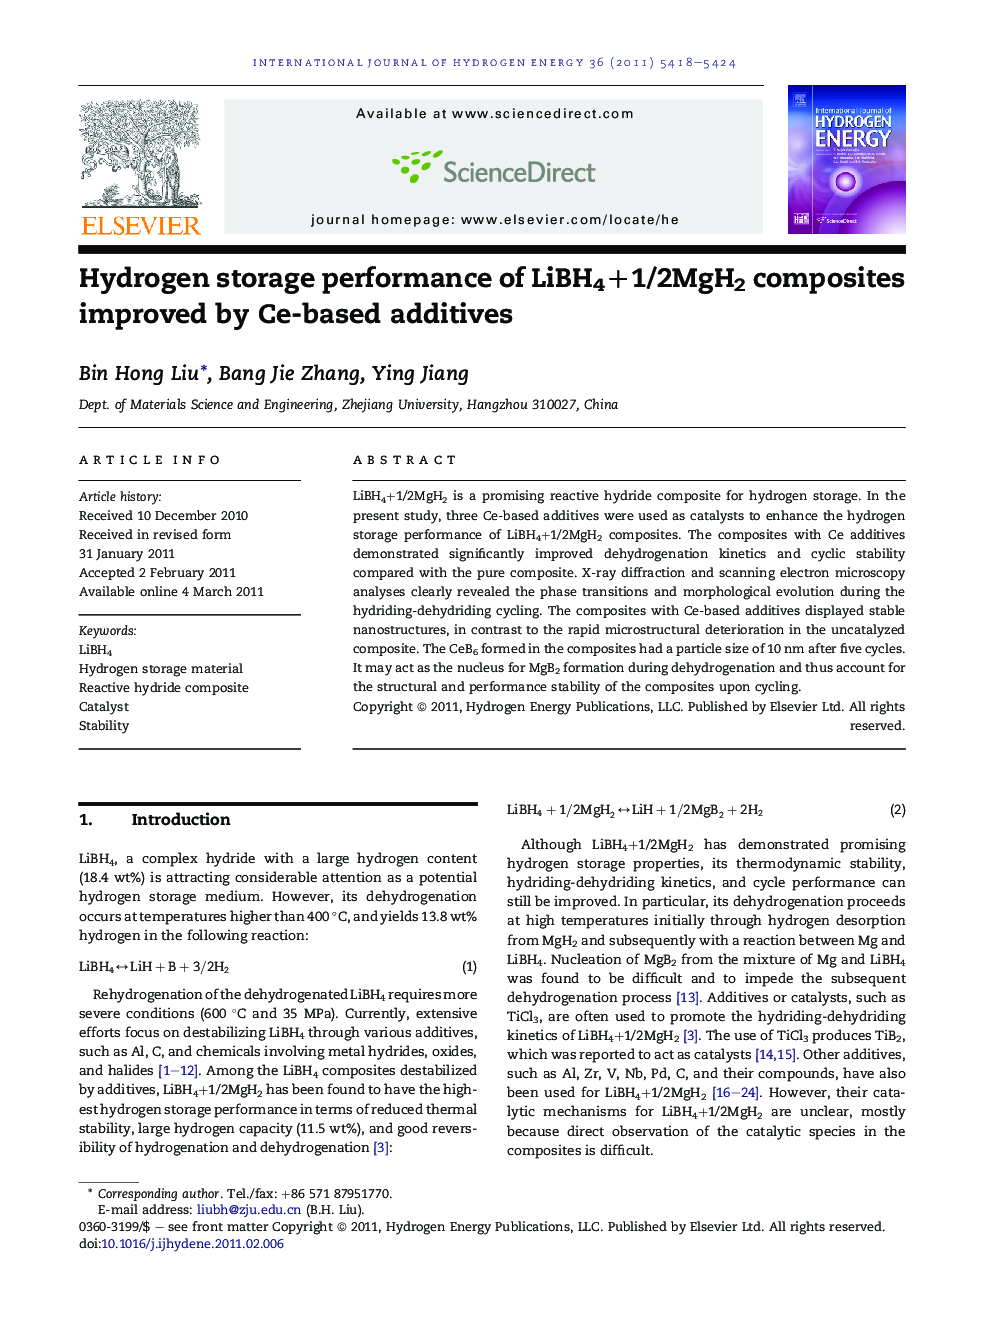 Hydrogen storage performance of LiBH4+1/2MgH2 composites improved by Ce-based additives